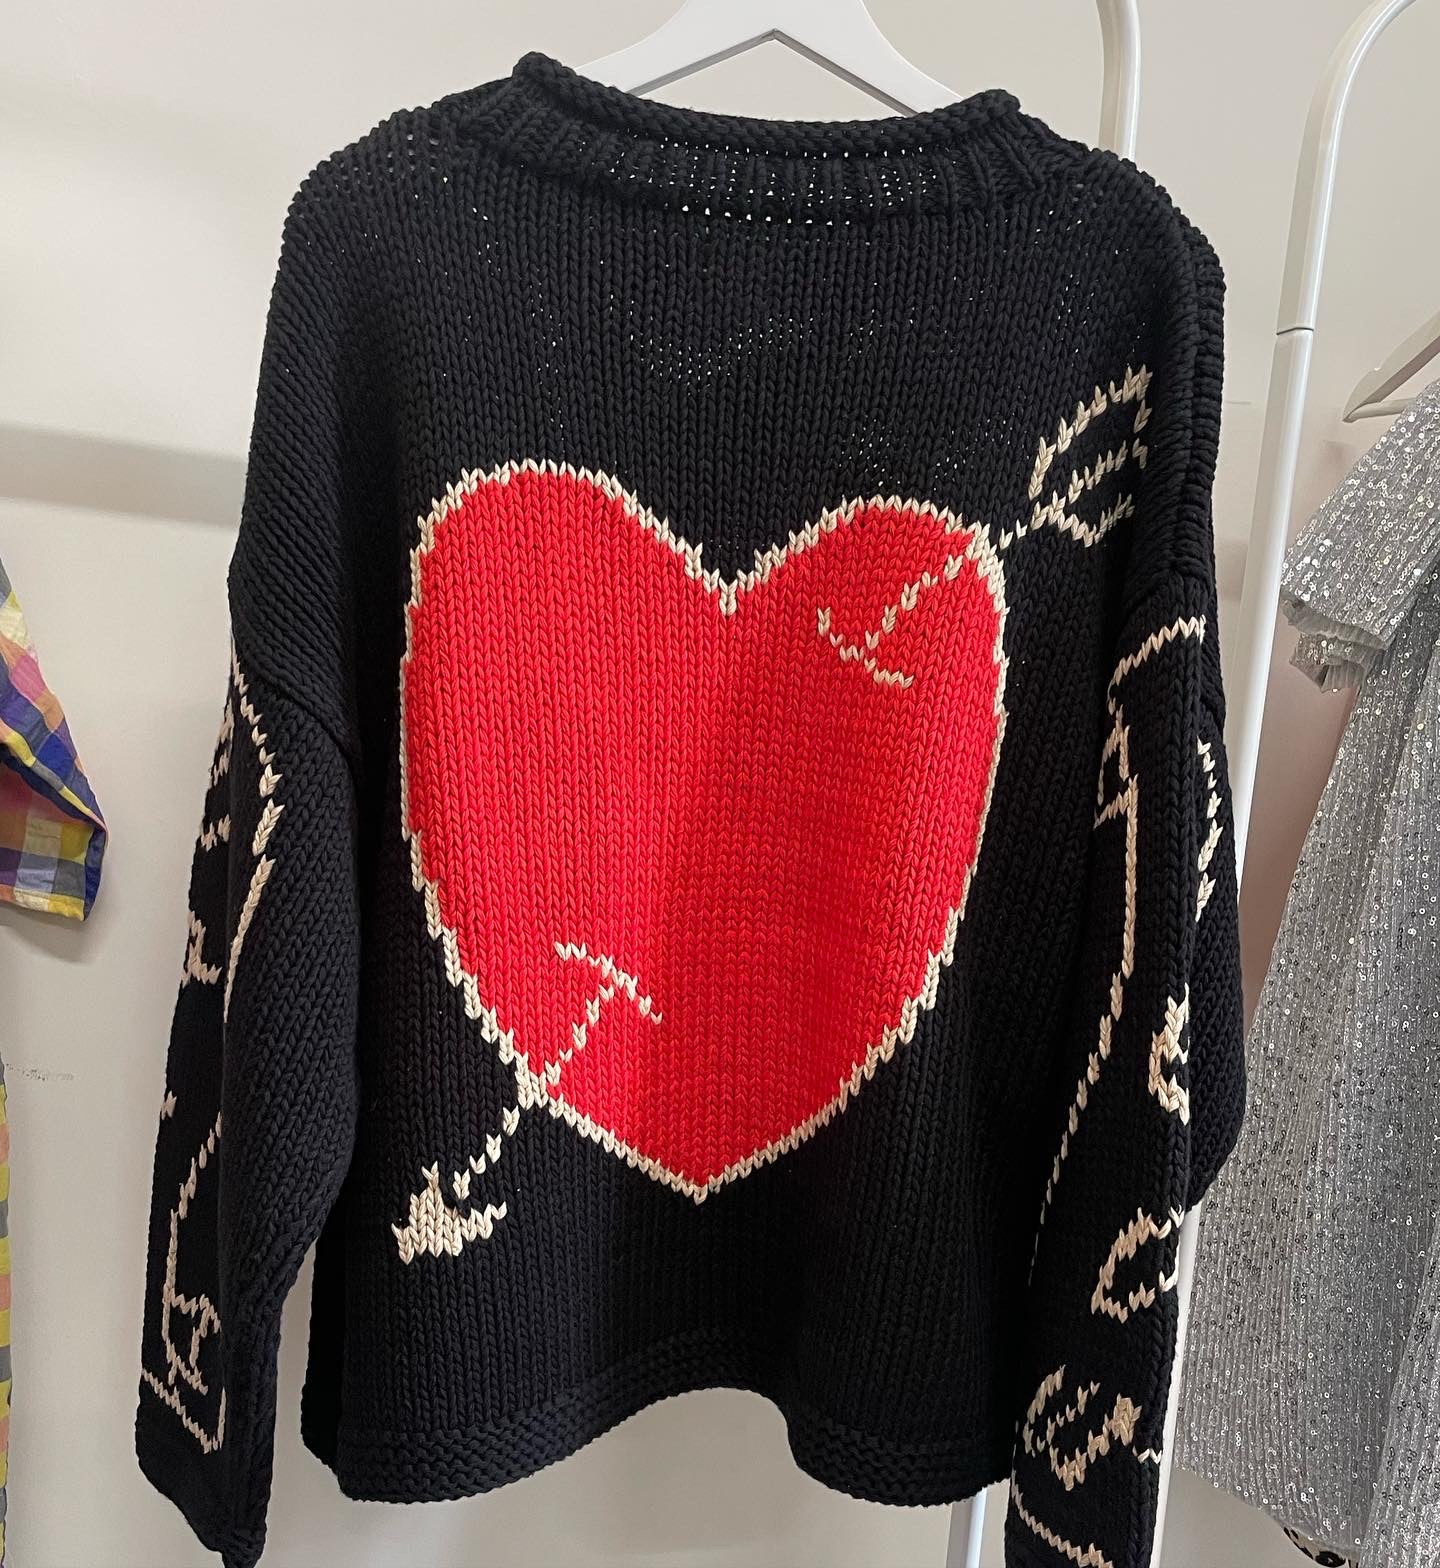 The Young Hearts Jumper - Black